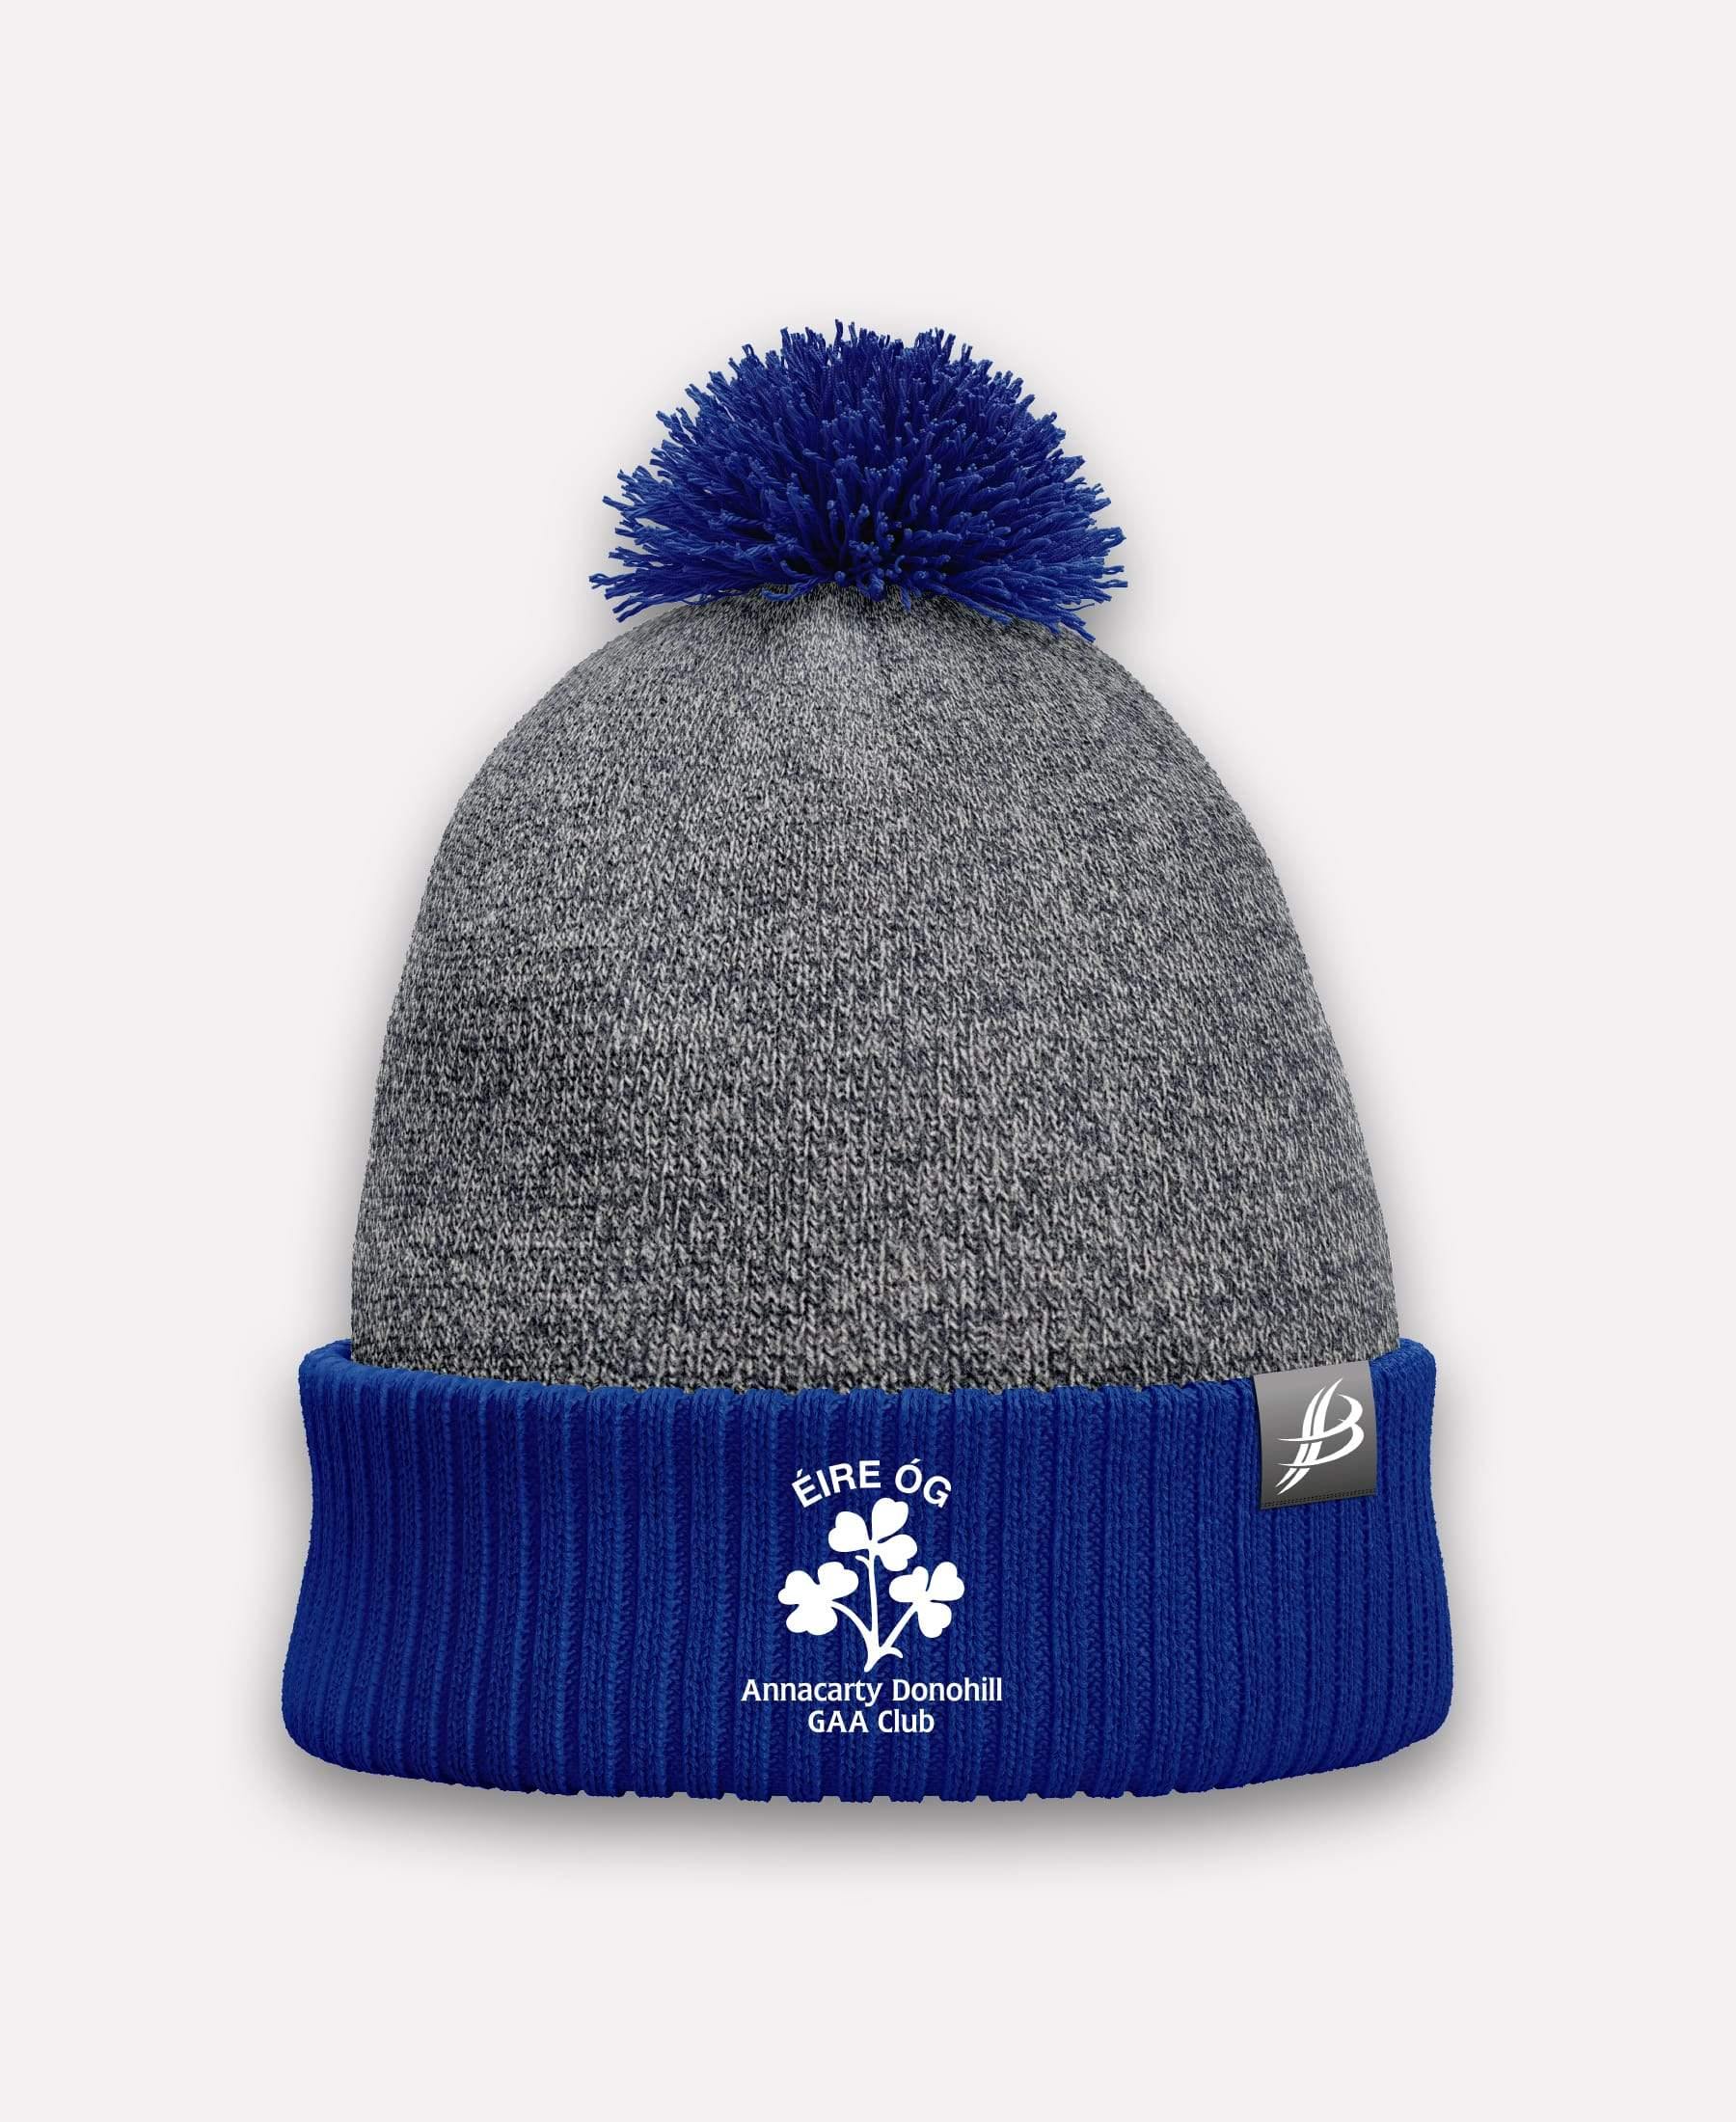 Eire Og Annacarty Donohill GAA Storm Bobble Hat - Bourke Sports Limited